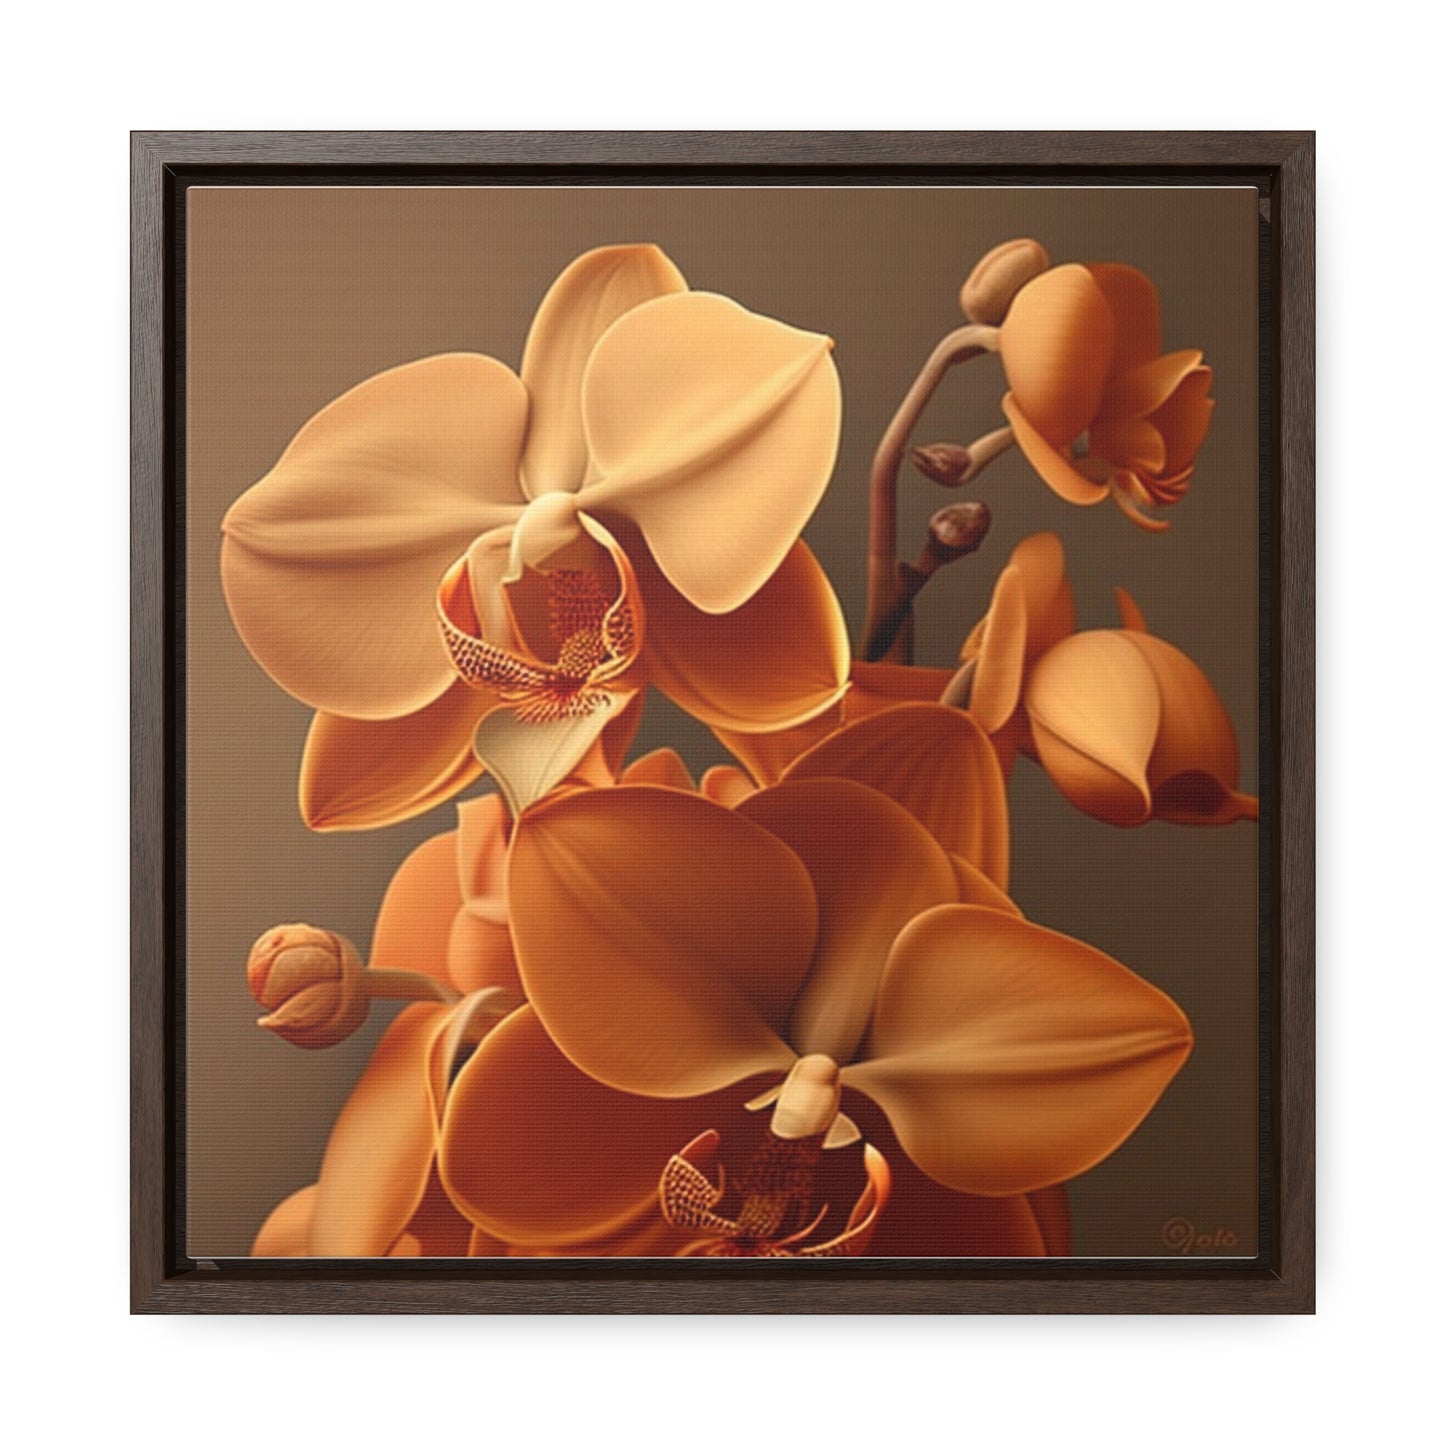 Gallery Canvas Wraps, Square Frame orchid pedals 4